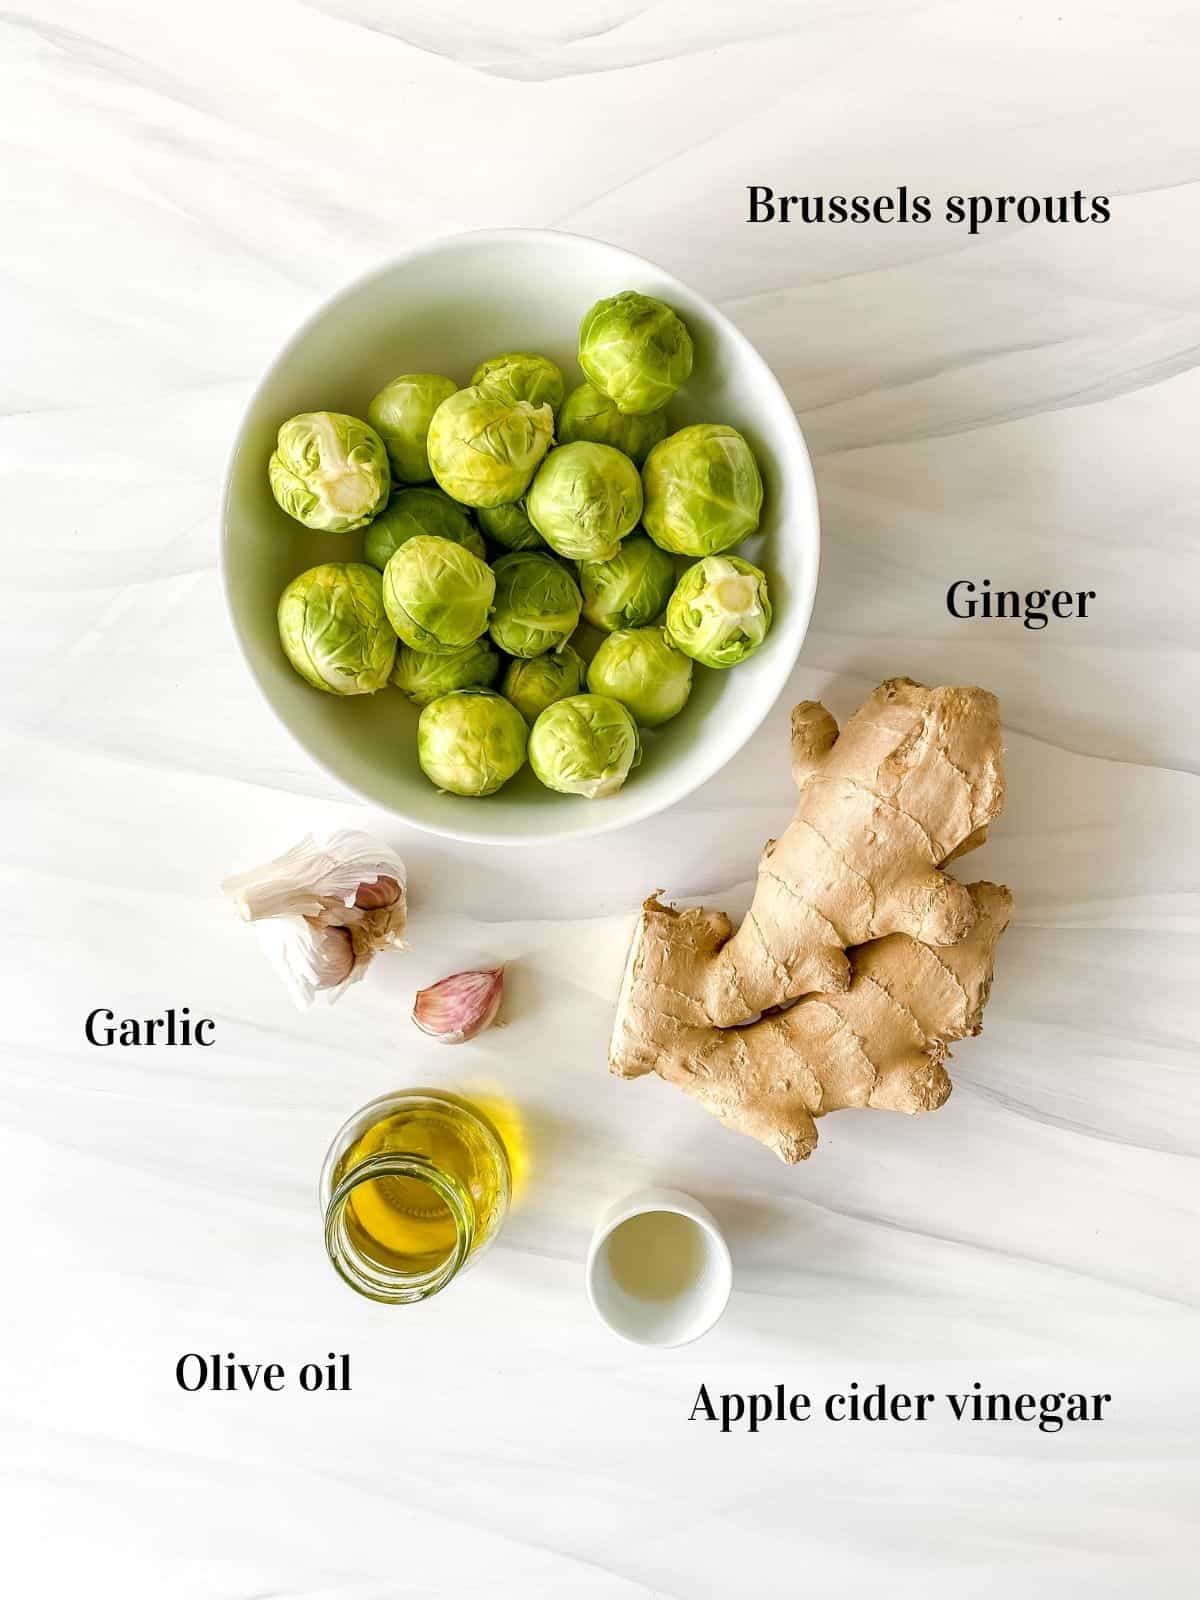 all the ingredients to make ginger brussels sprouts.